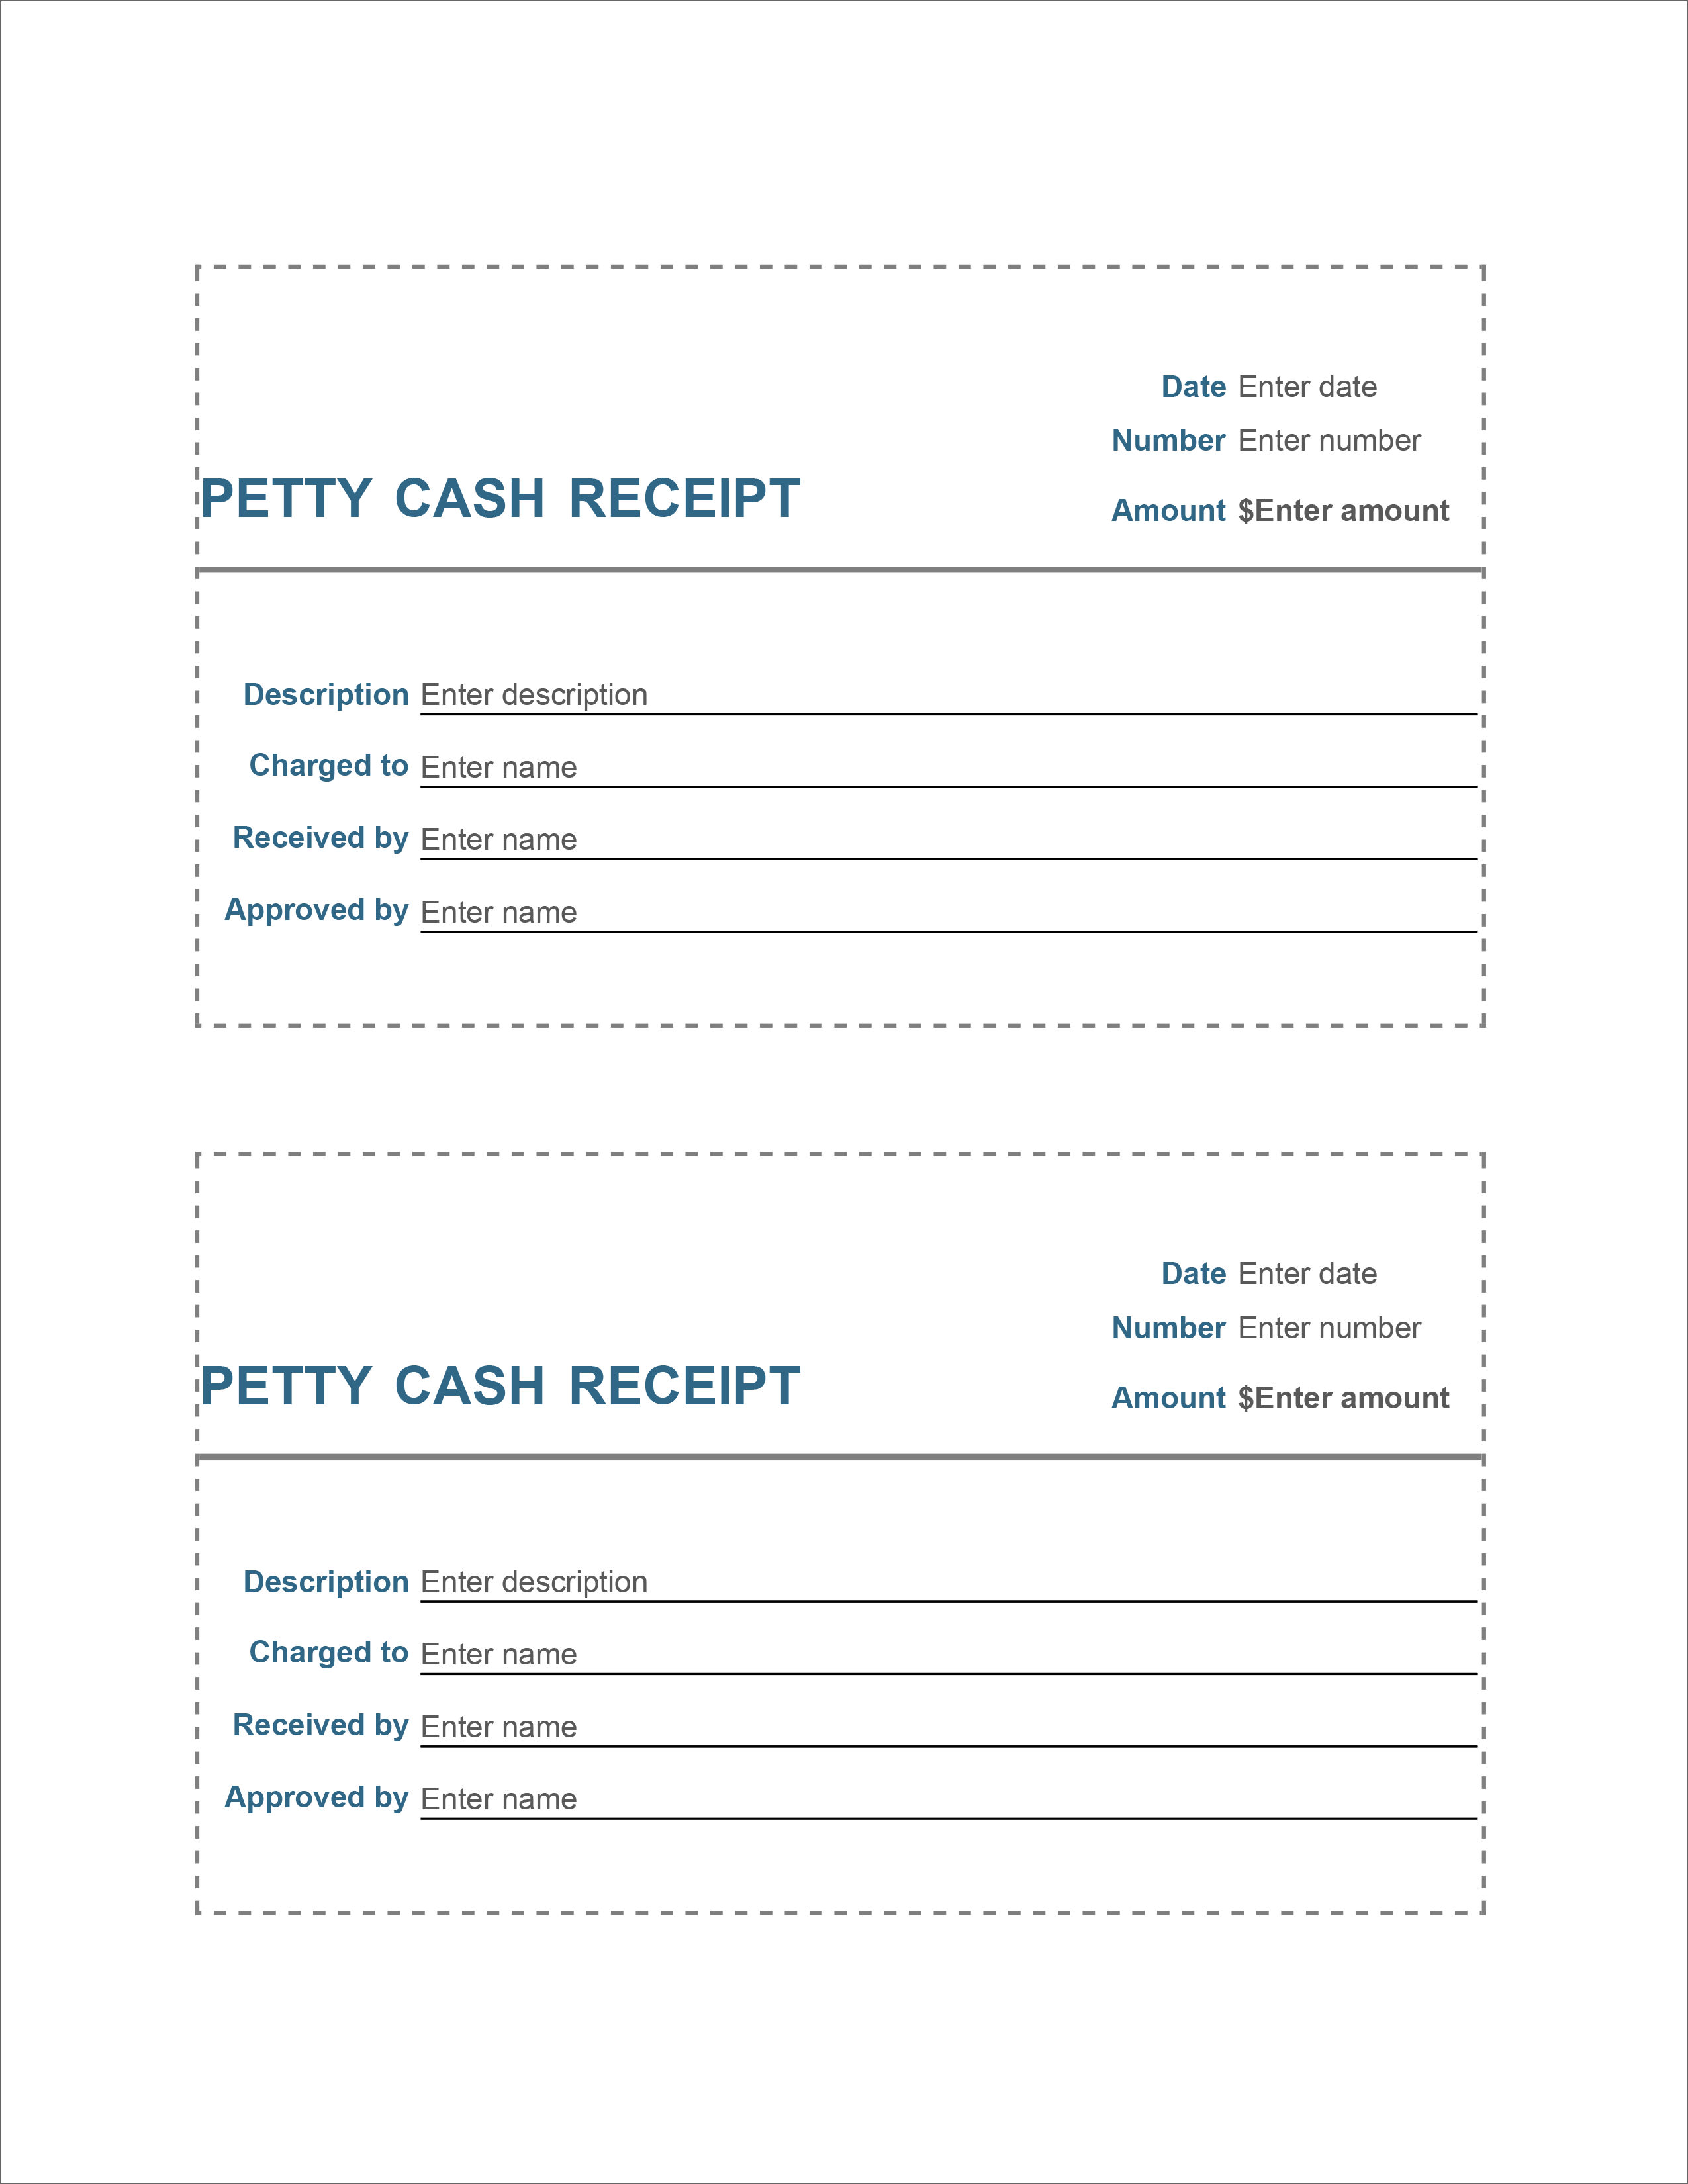 21 Free Receipt Templates - Download For Microsoft Word, Excel With Regard To Fake Credit Card Receipt Template